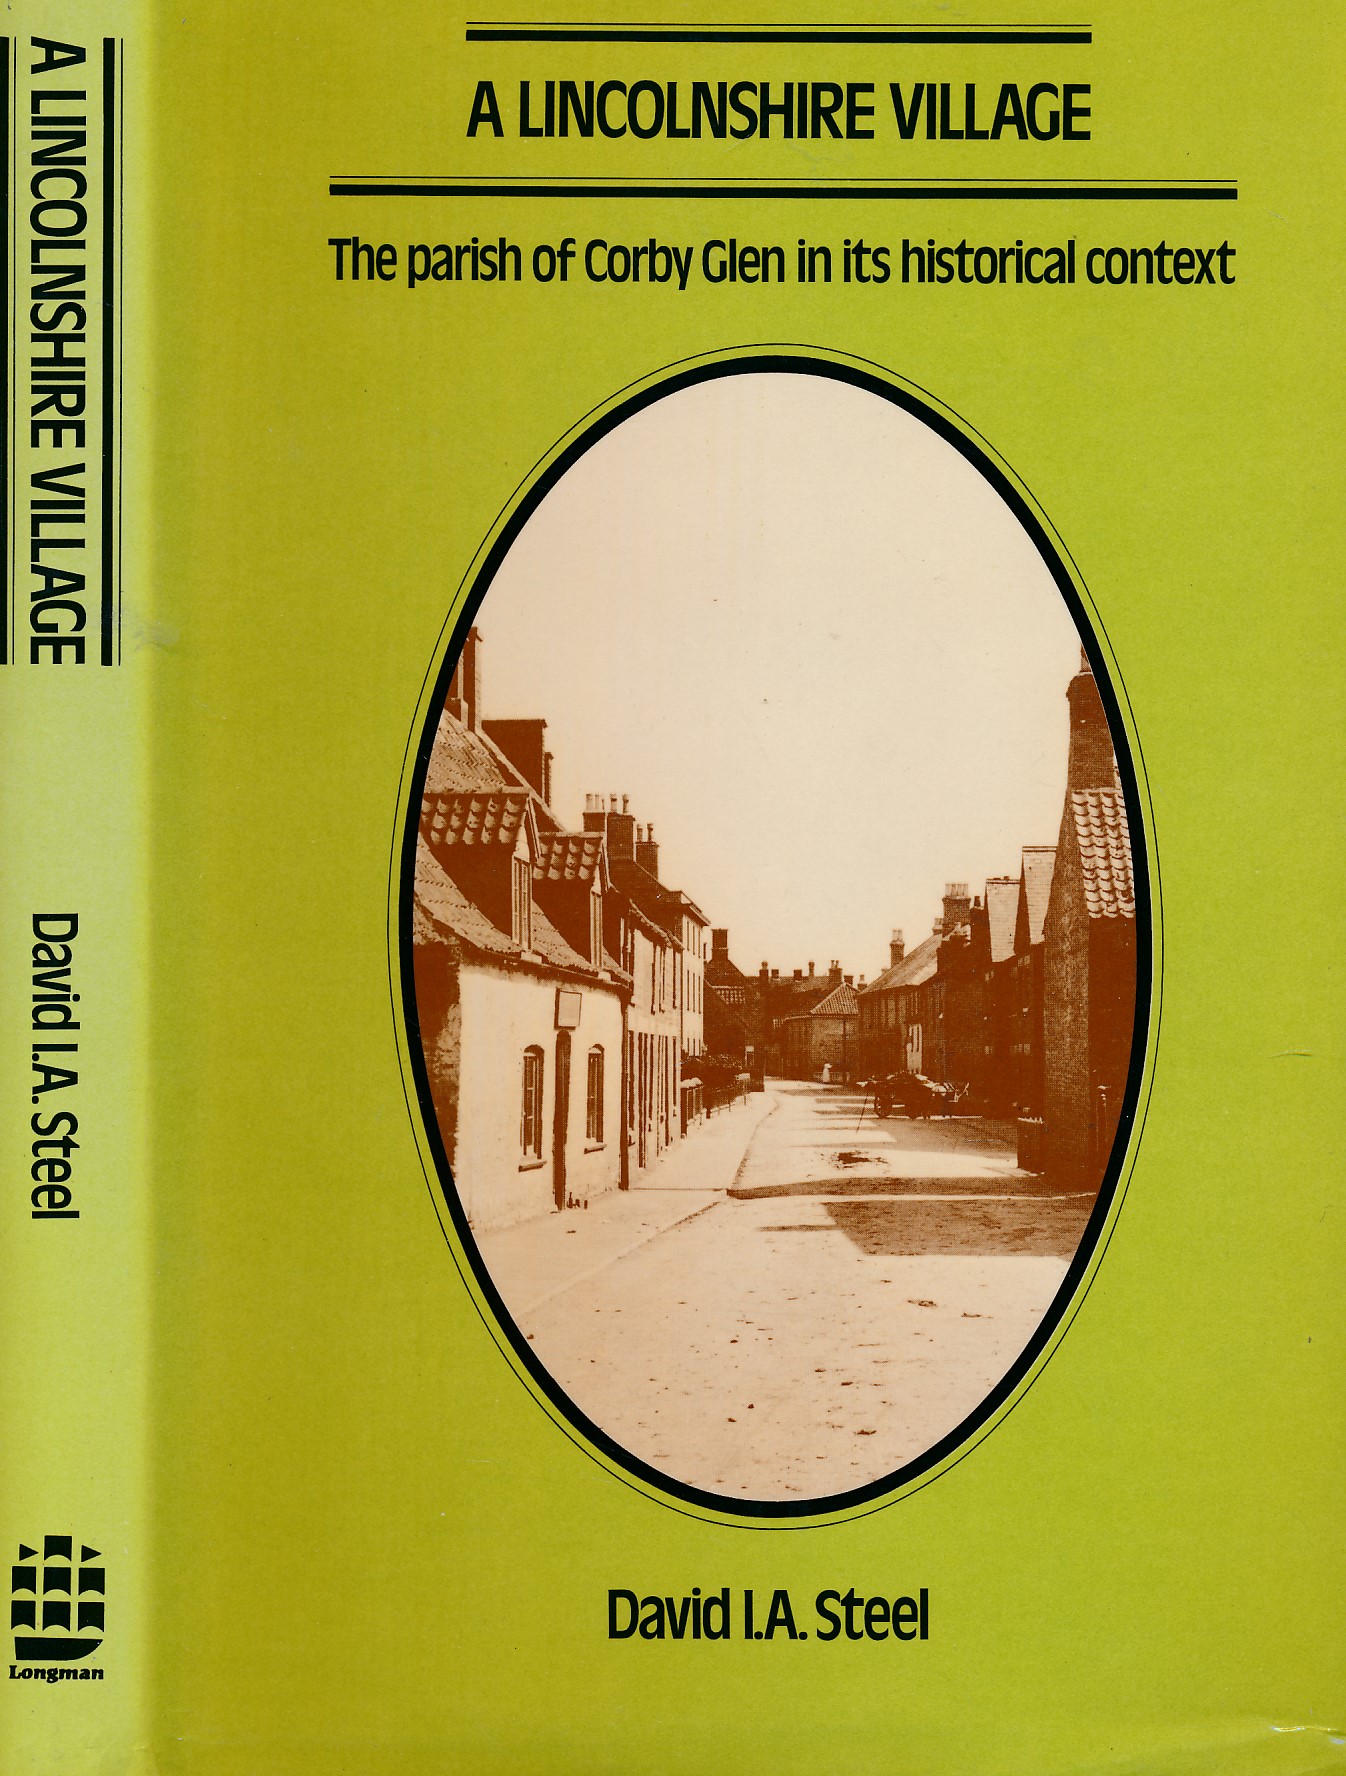 A Lincolnshire Village. The Parish of Corby Glen in Its Historical Context.